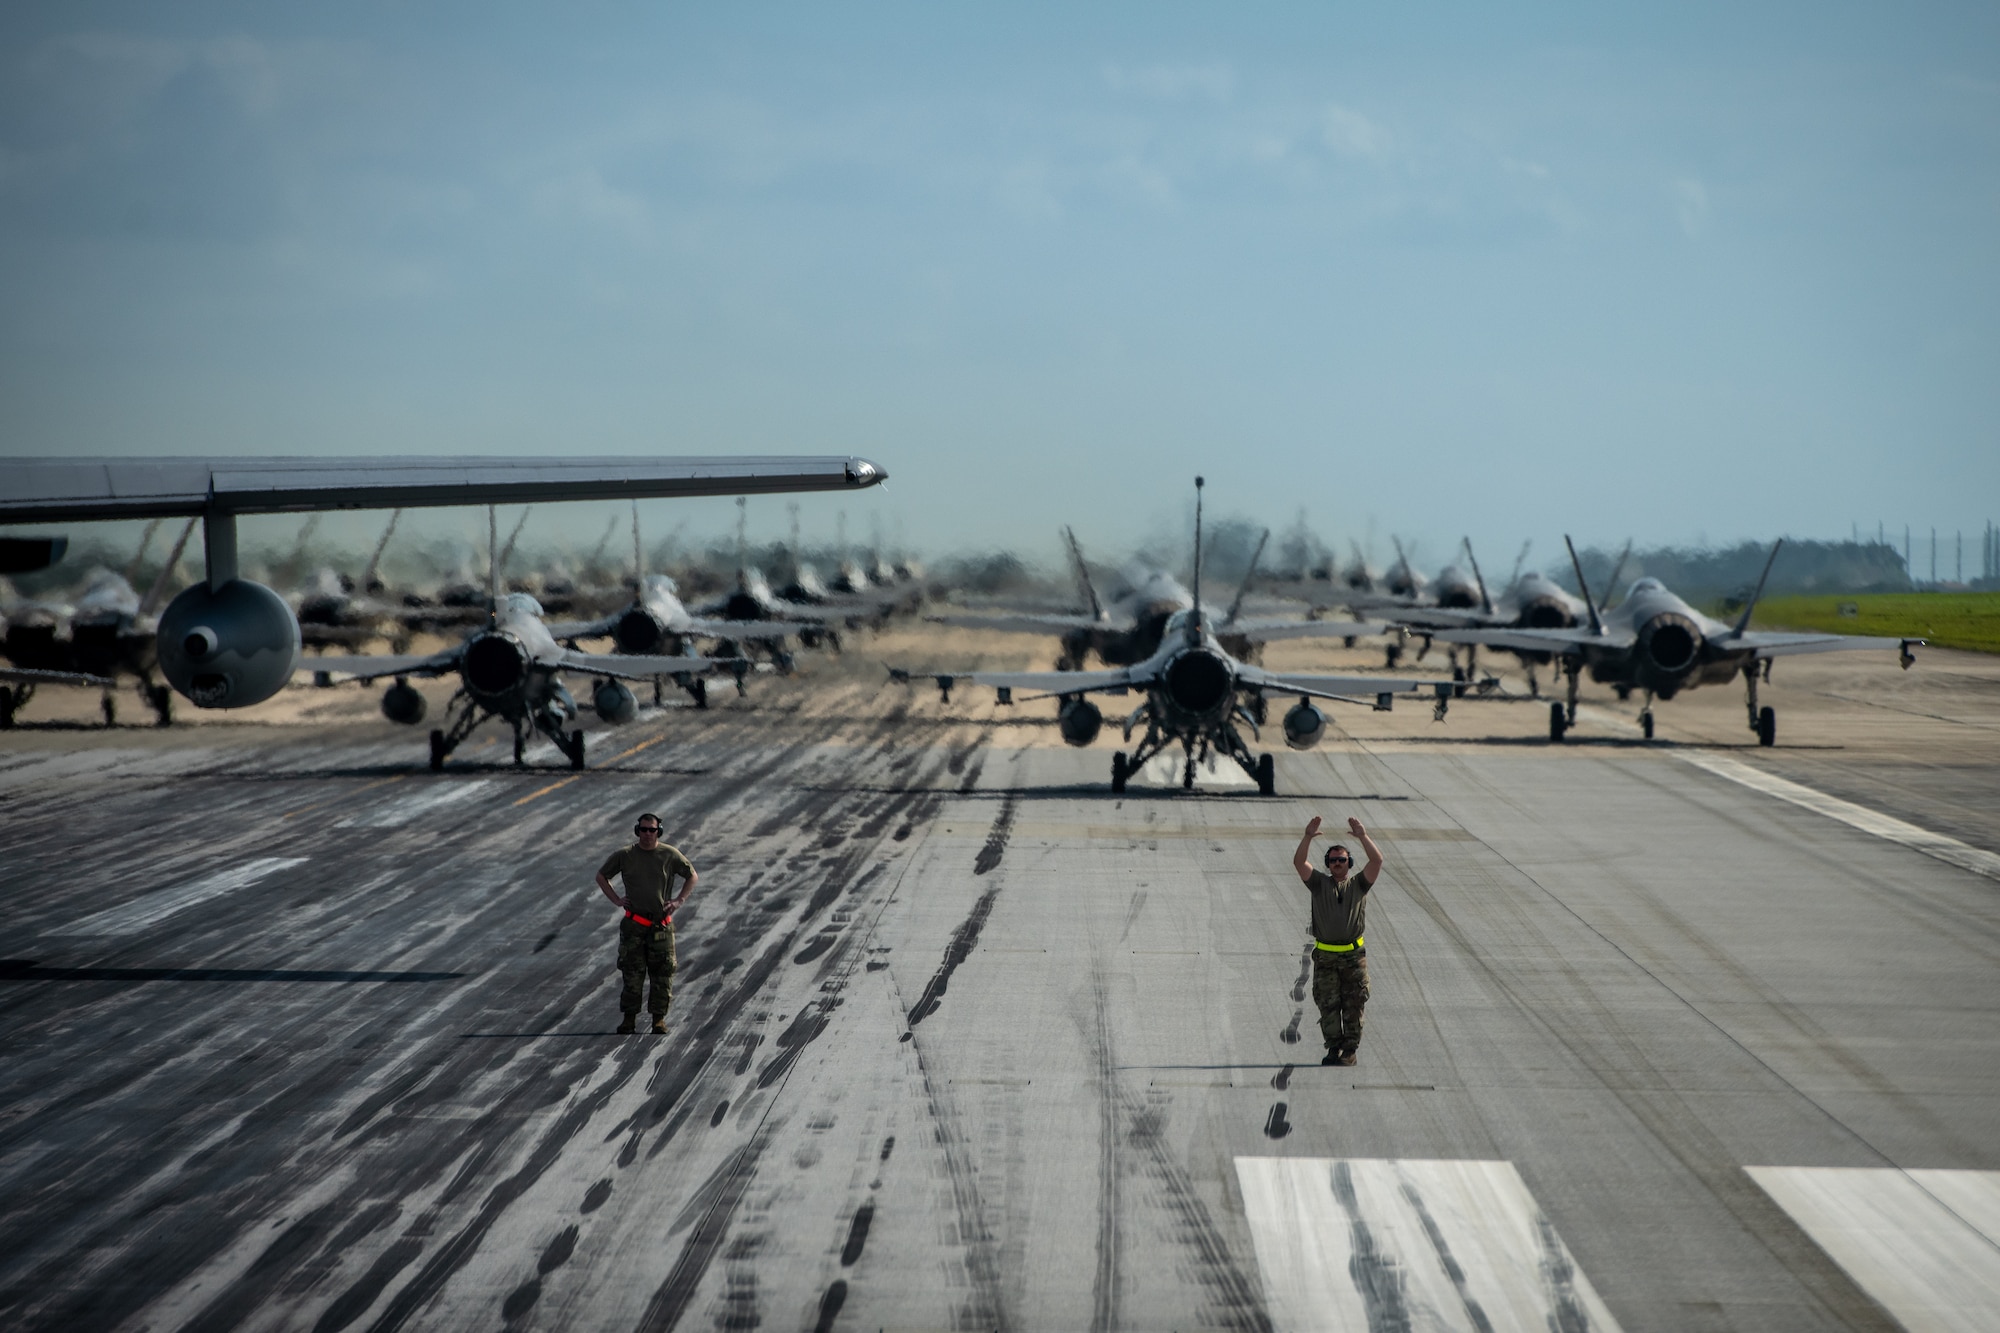 Airmen marshal aircraft into formation on a runway